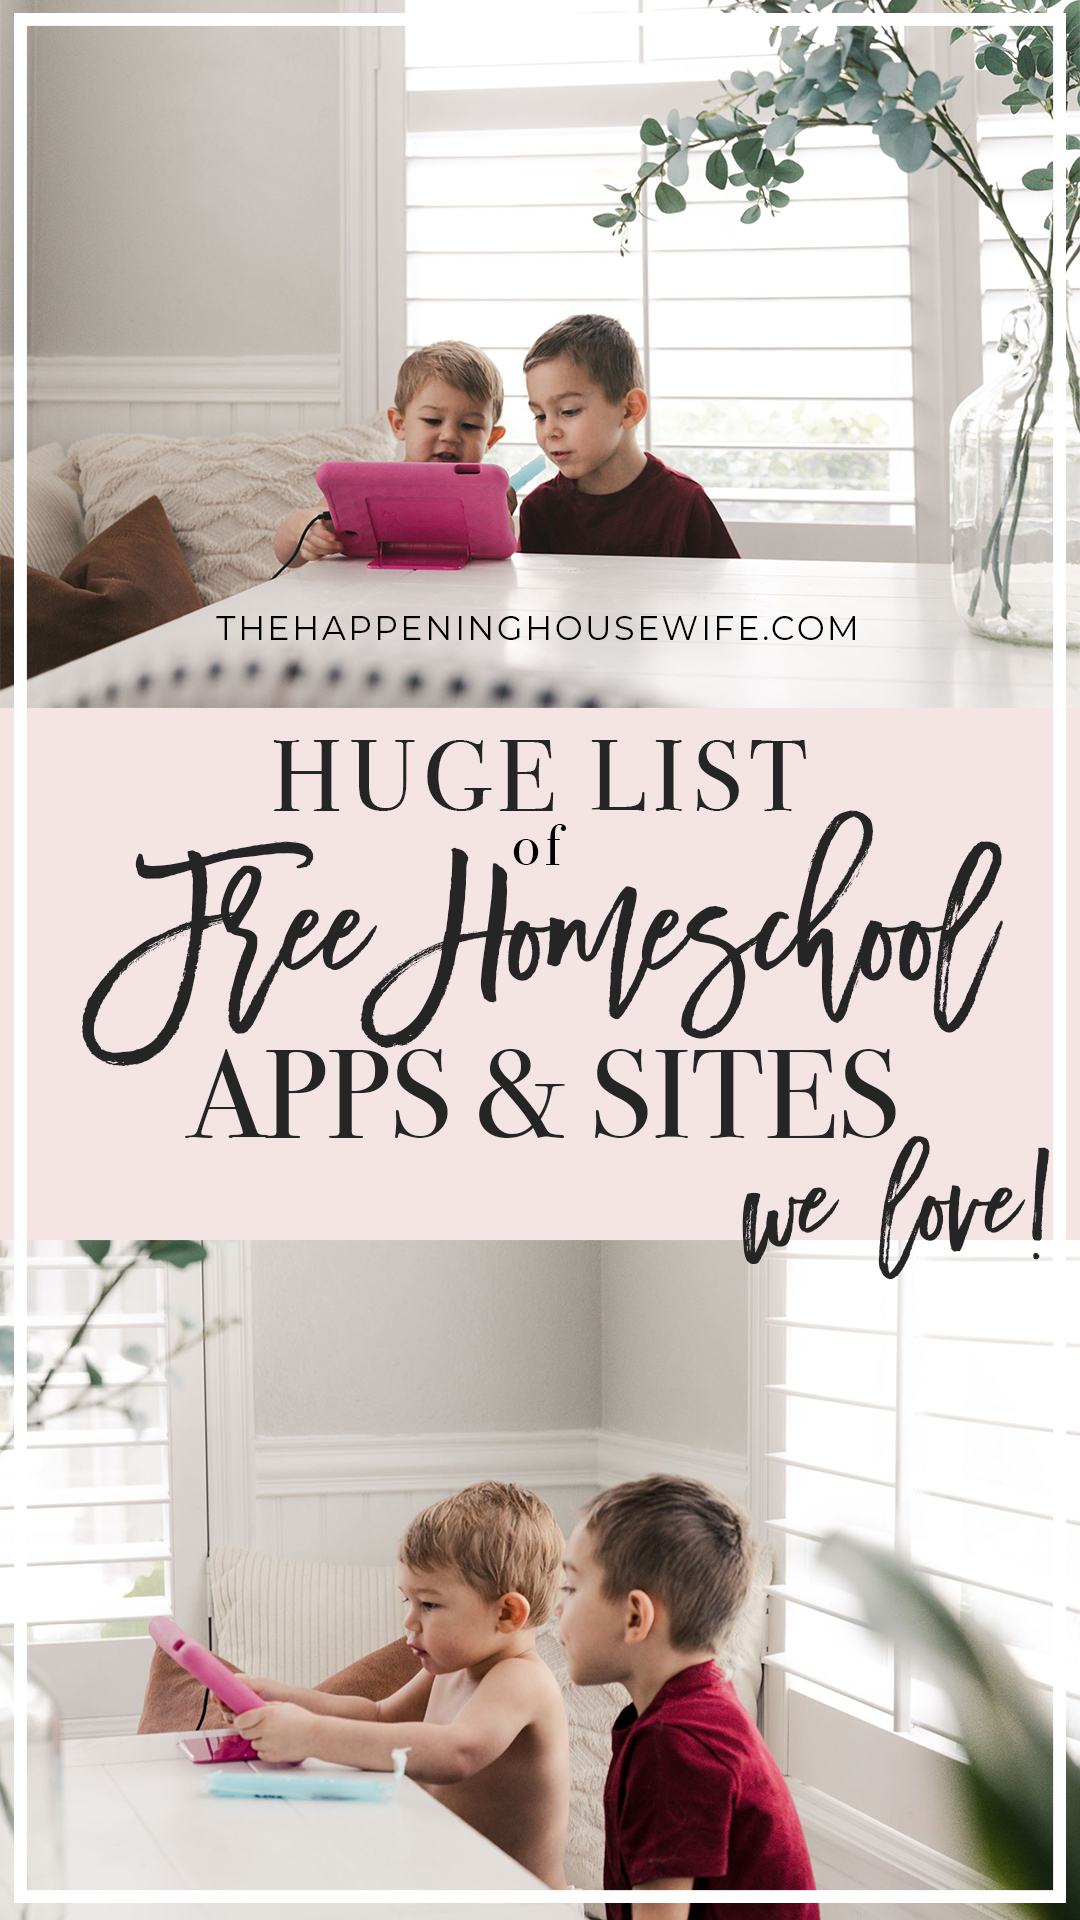 HUGE List of FREE Homeschooling apps and sites for kids!!